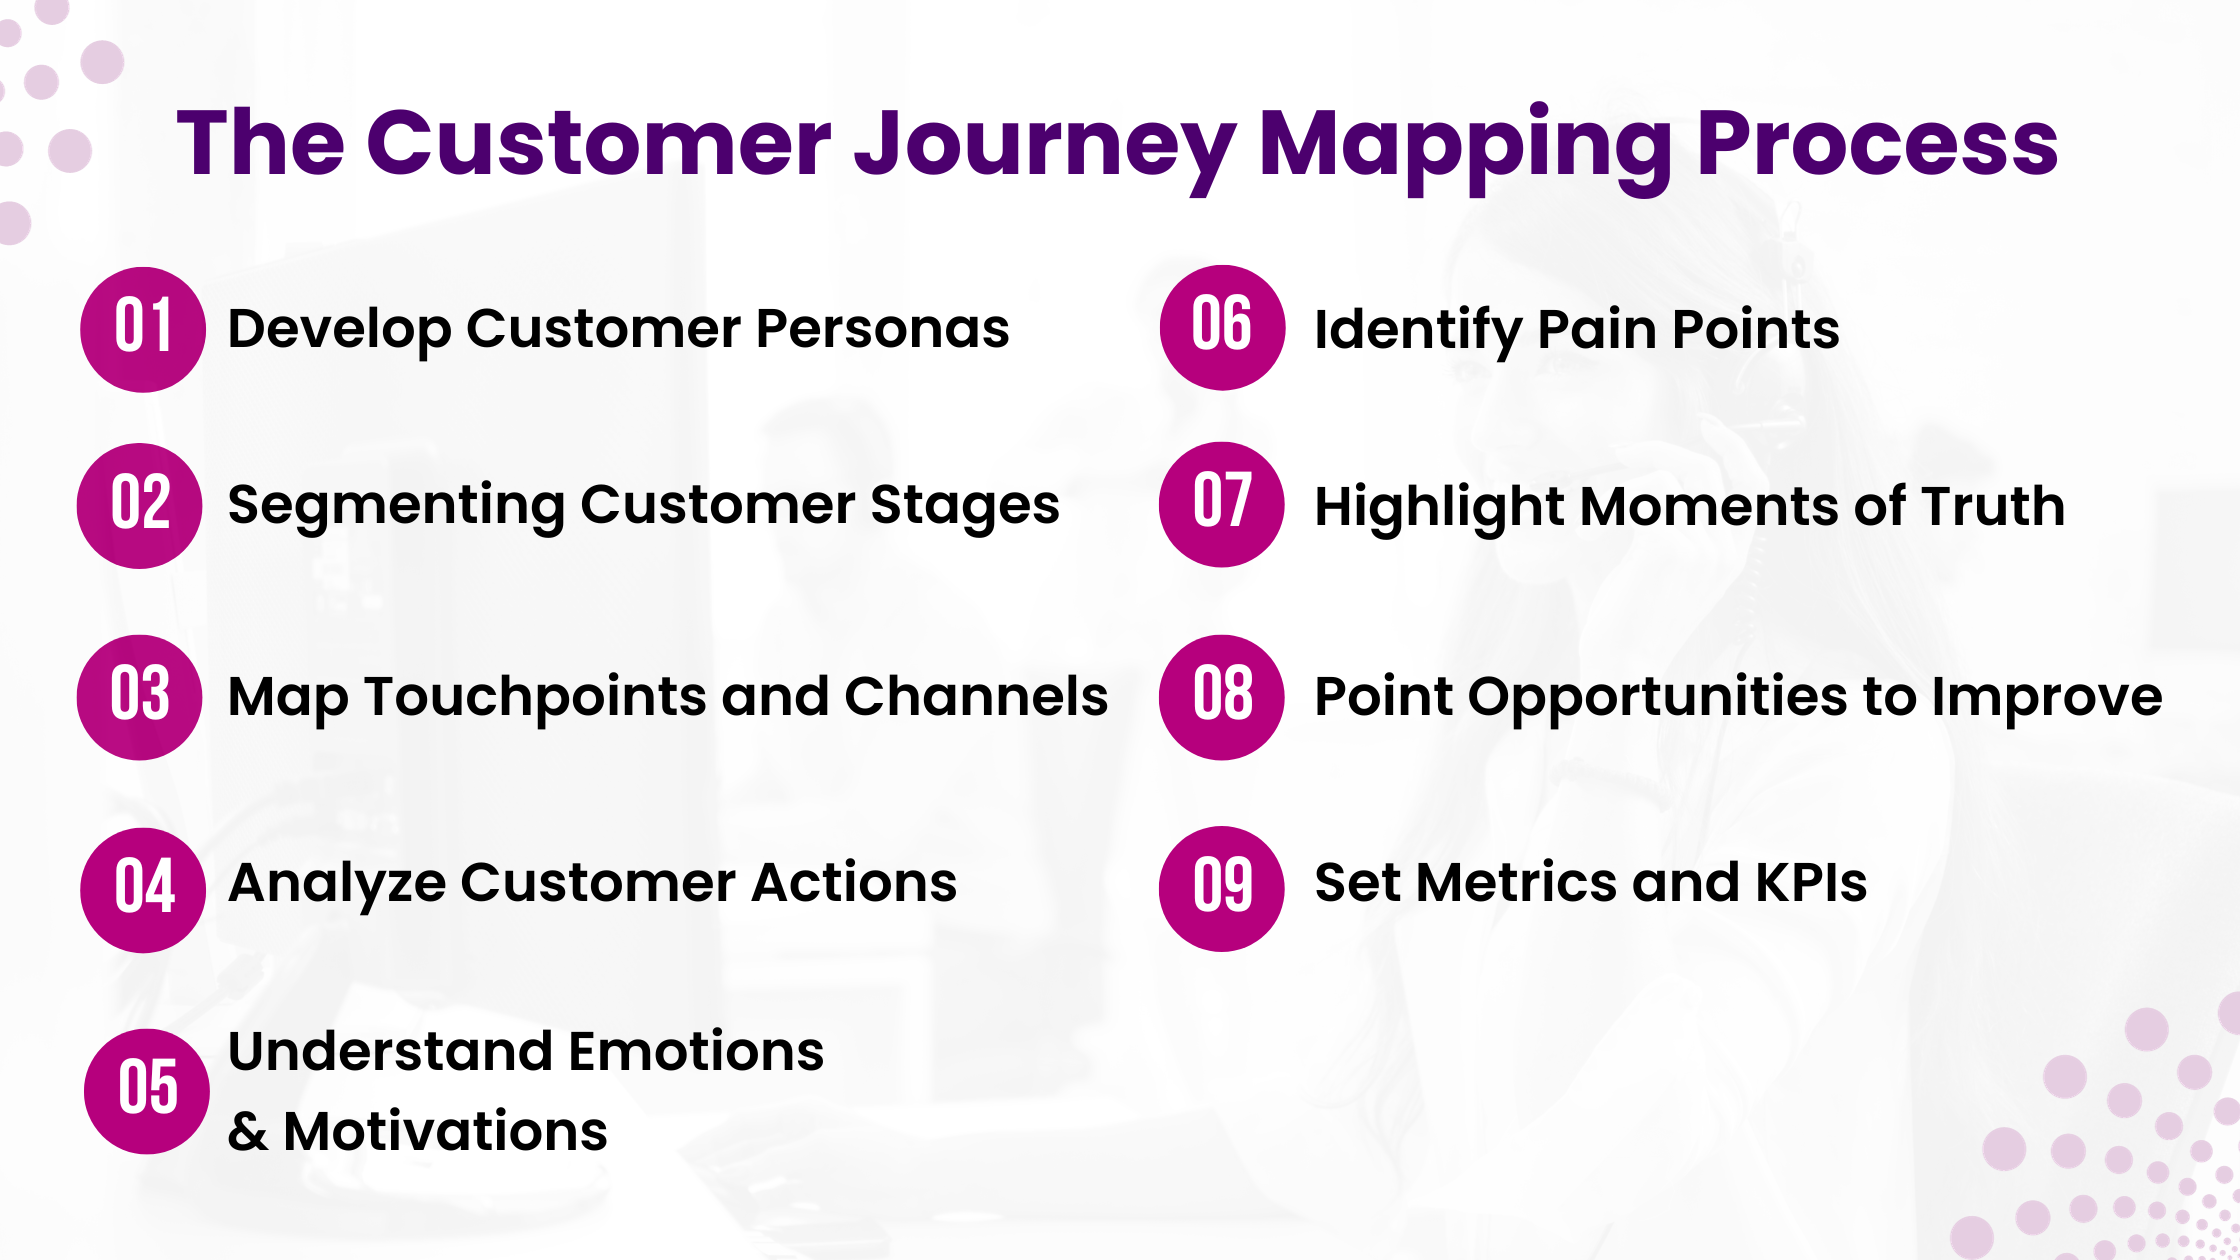 The Customer Journey Mapping Process